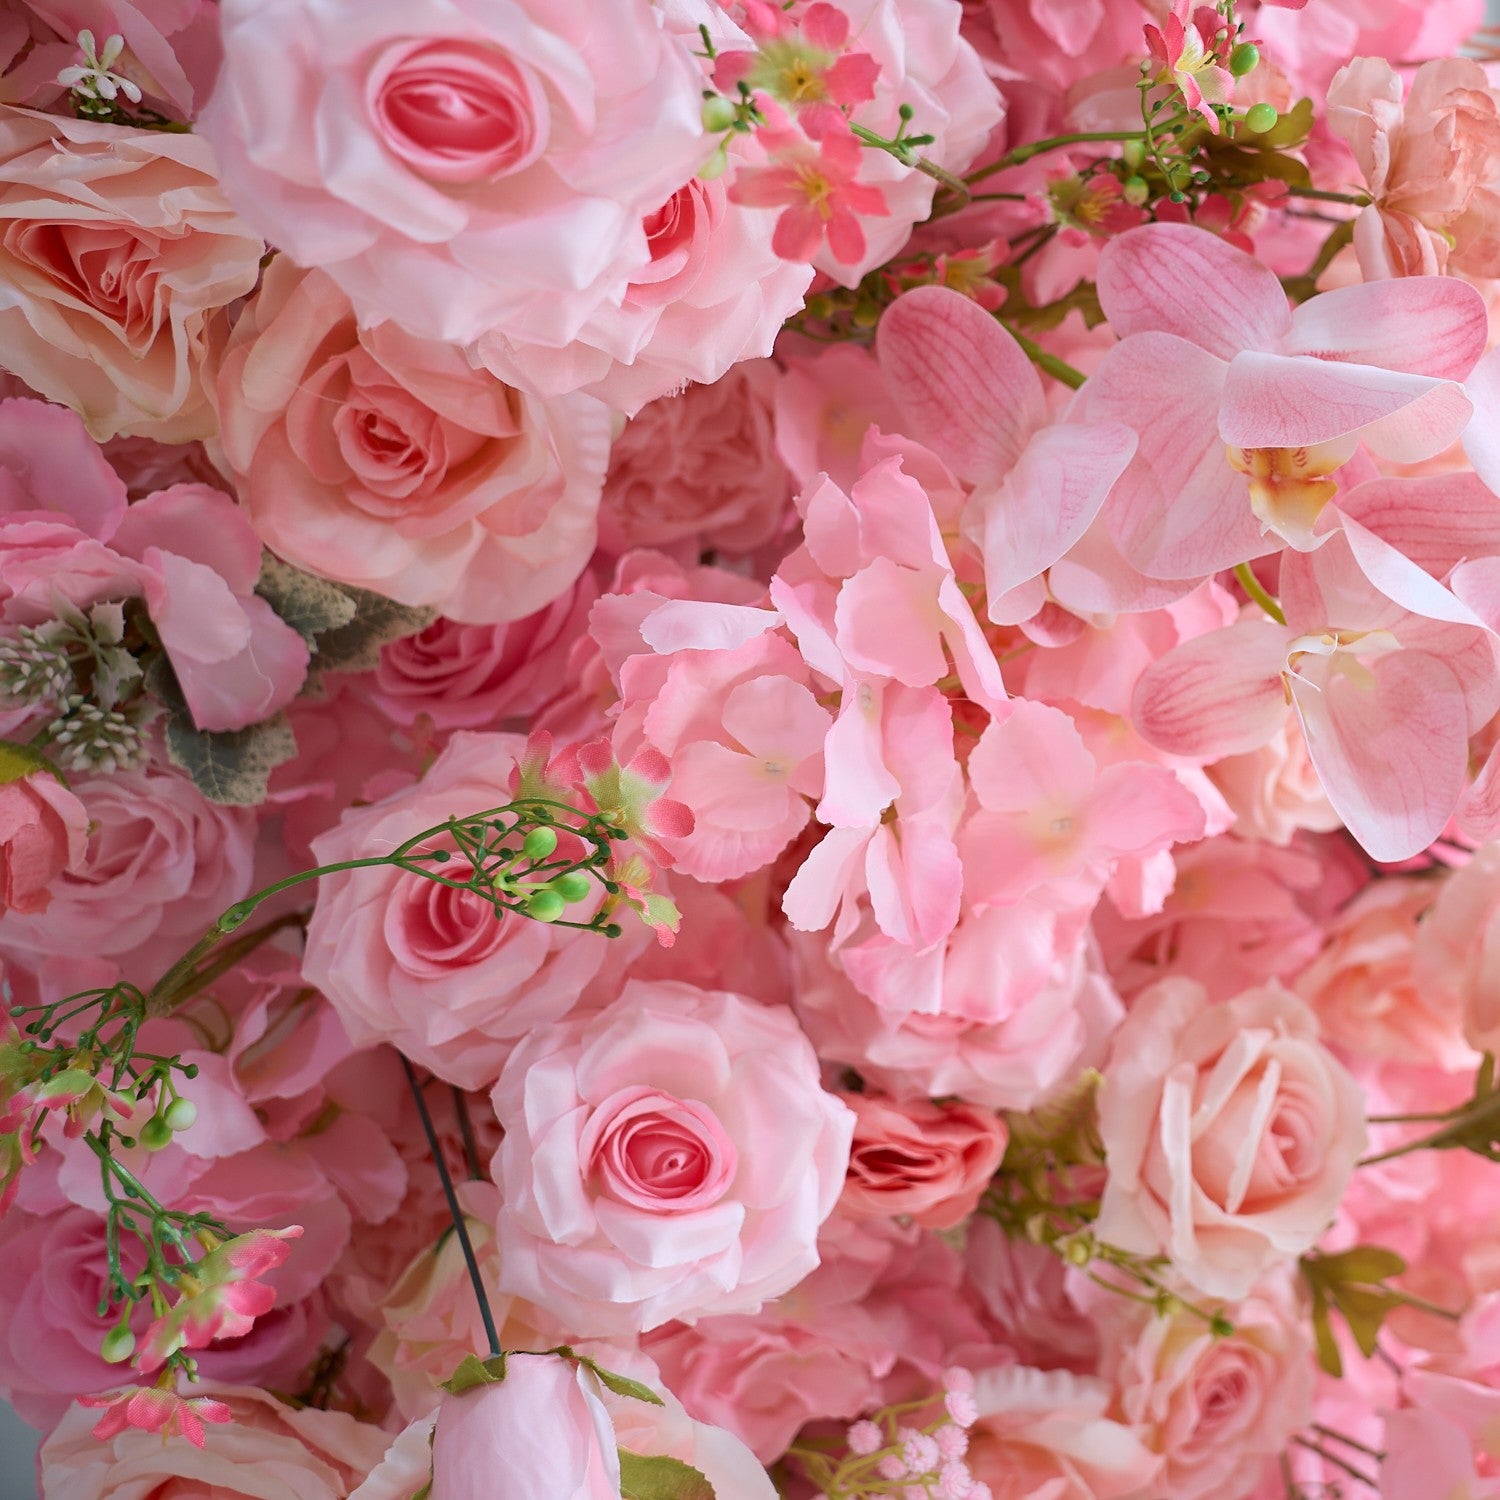 The pink roses flower wall looks vivid and realistic.